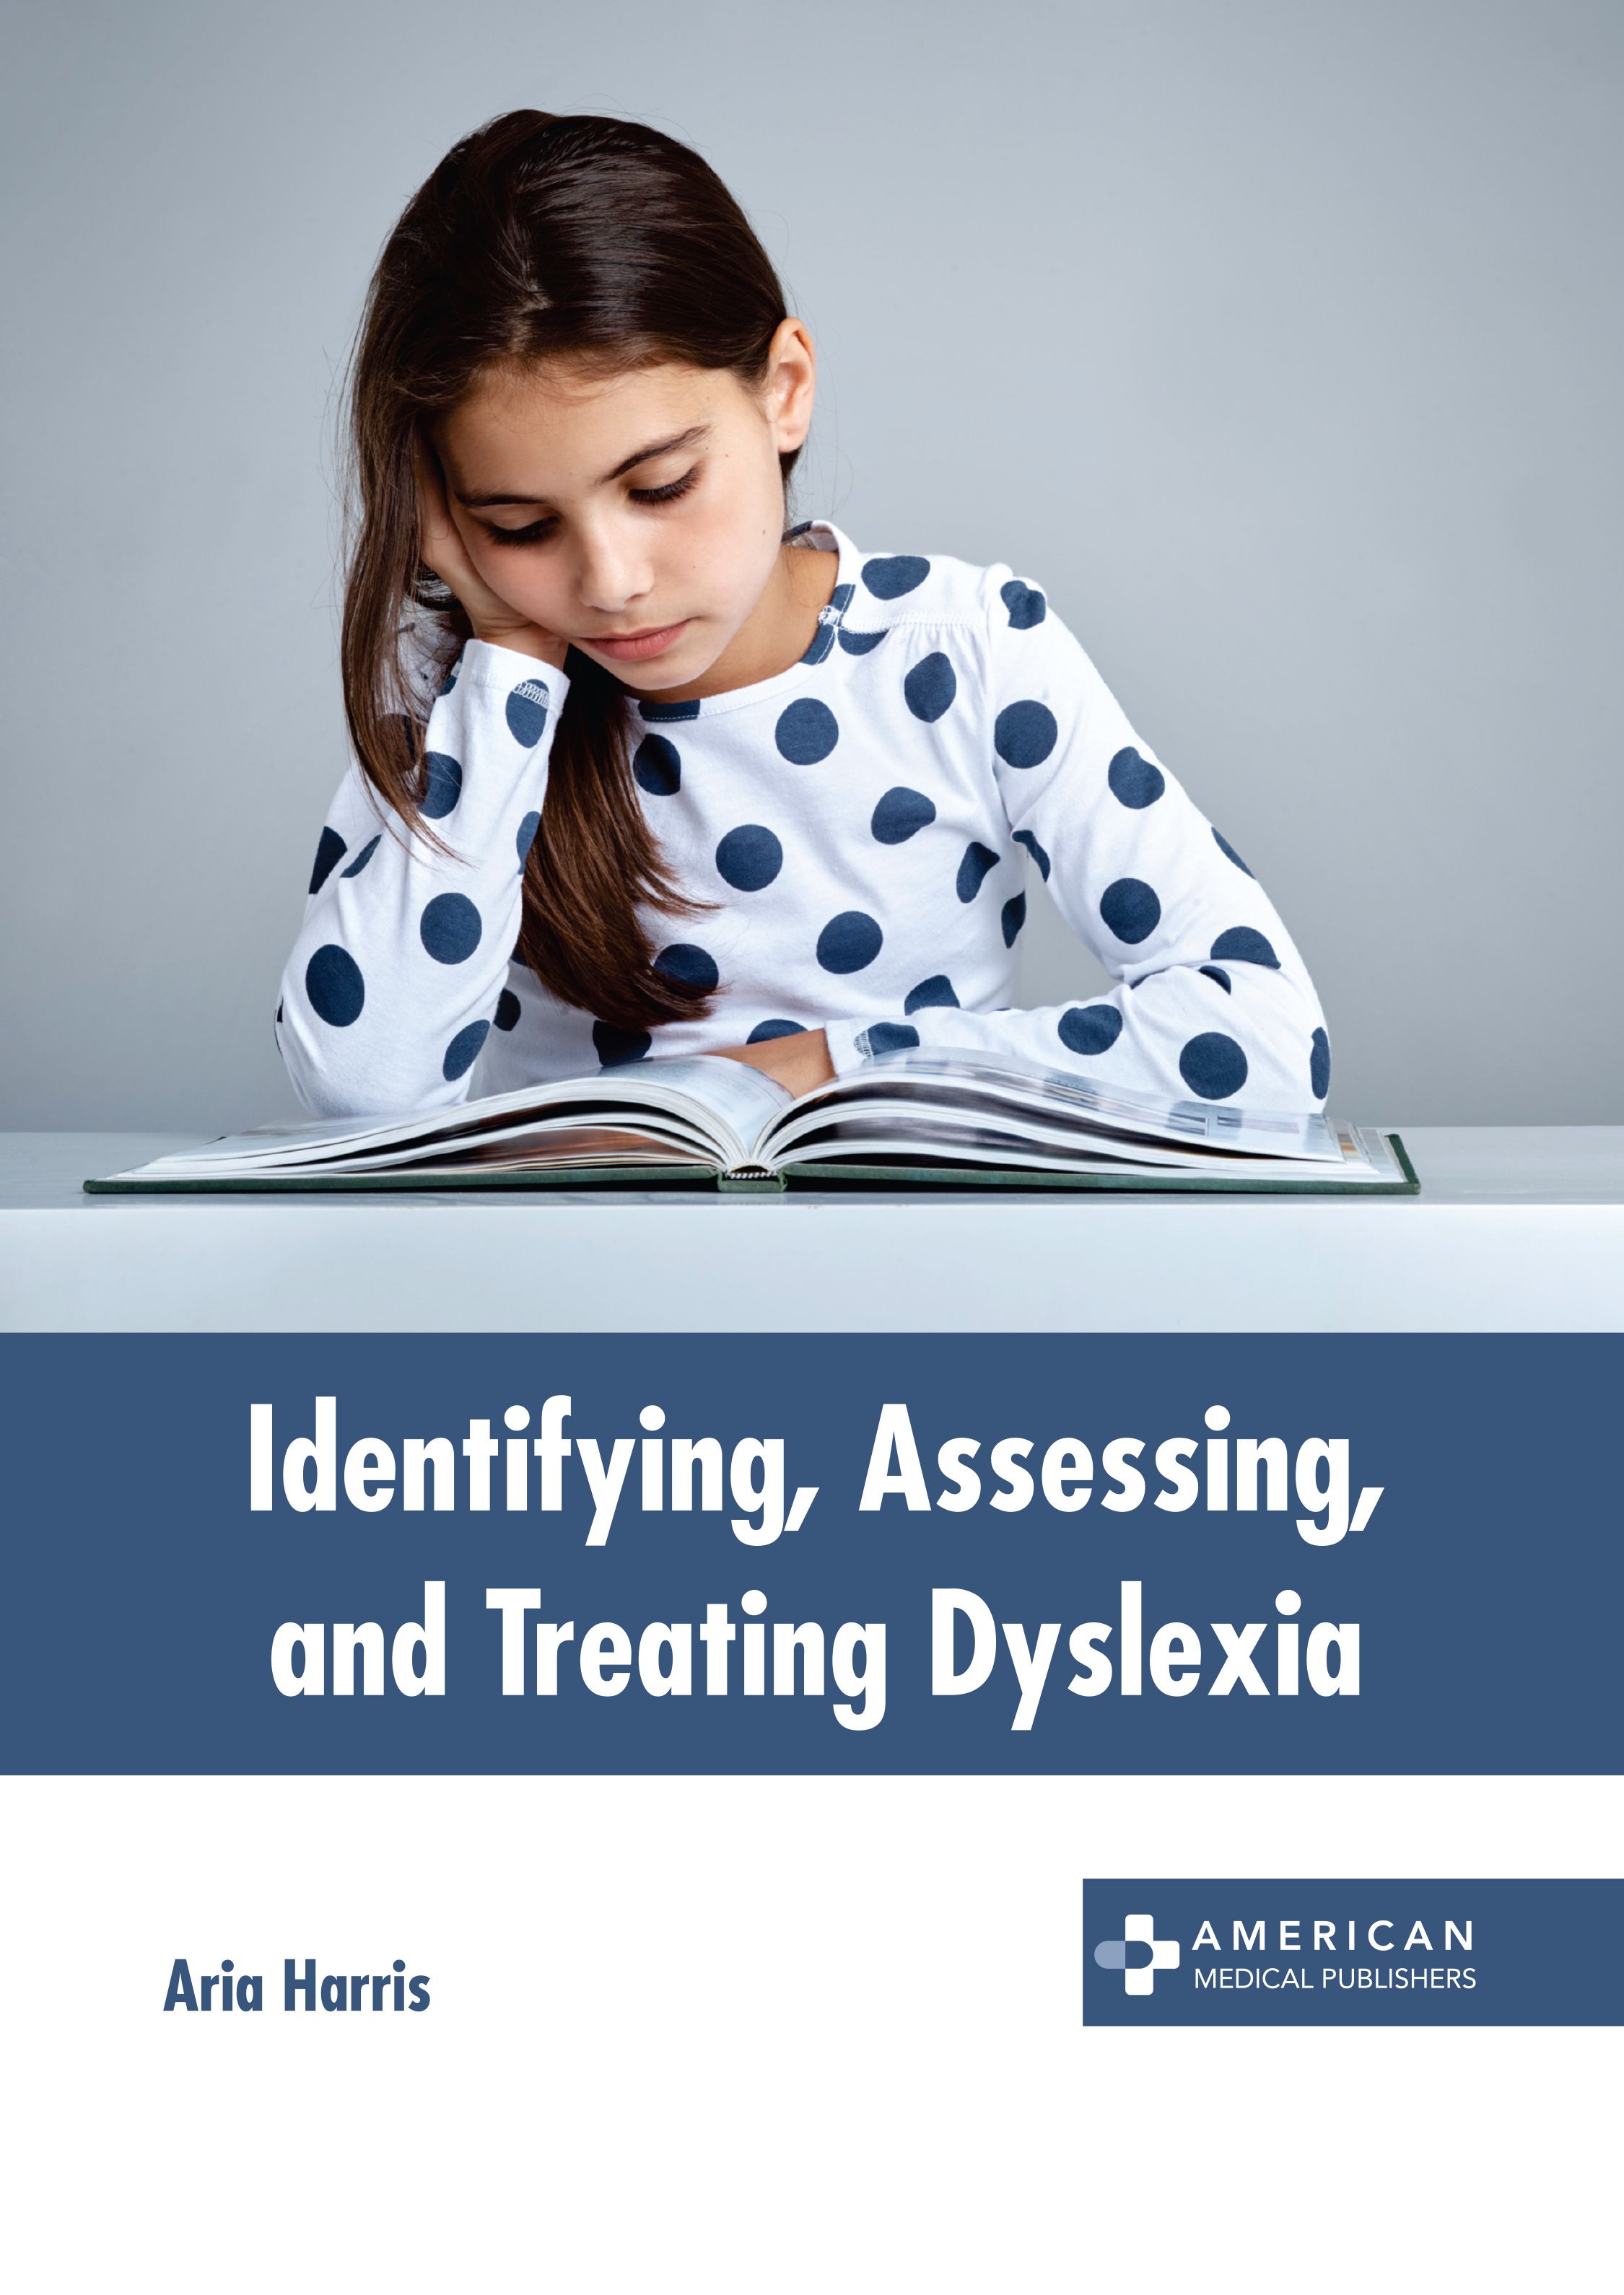 IDENTIFYING, ASSESSING, AND TREATING DYSLEXIA